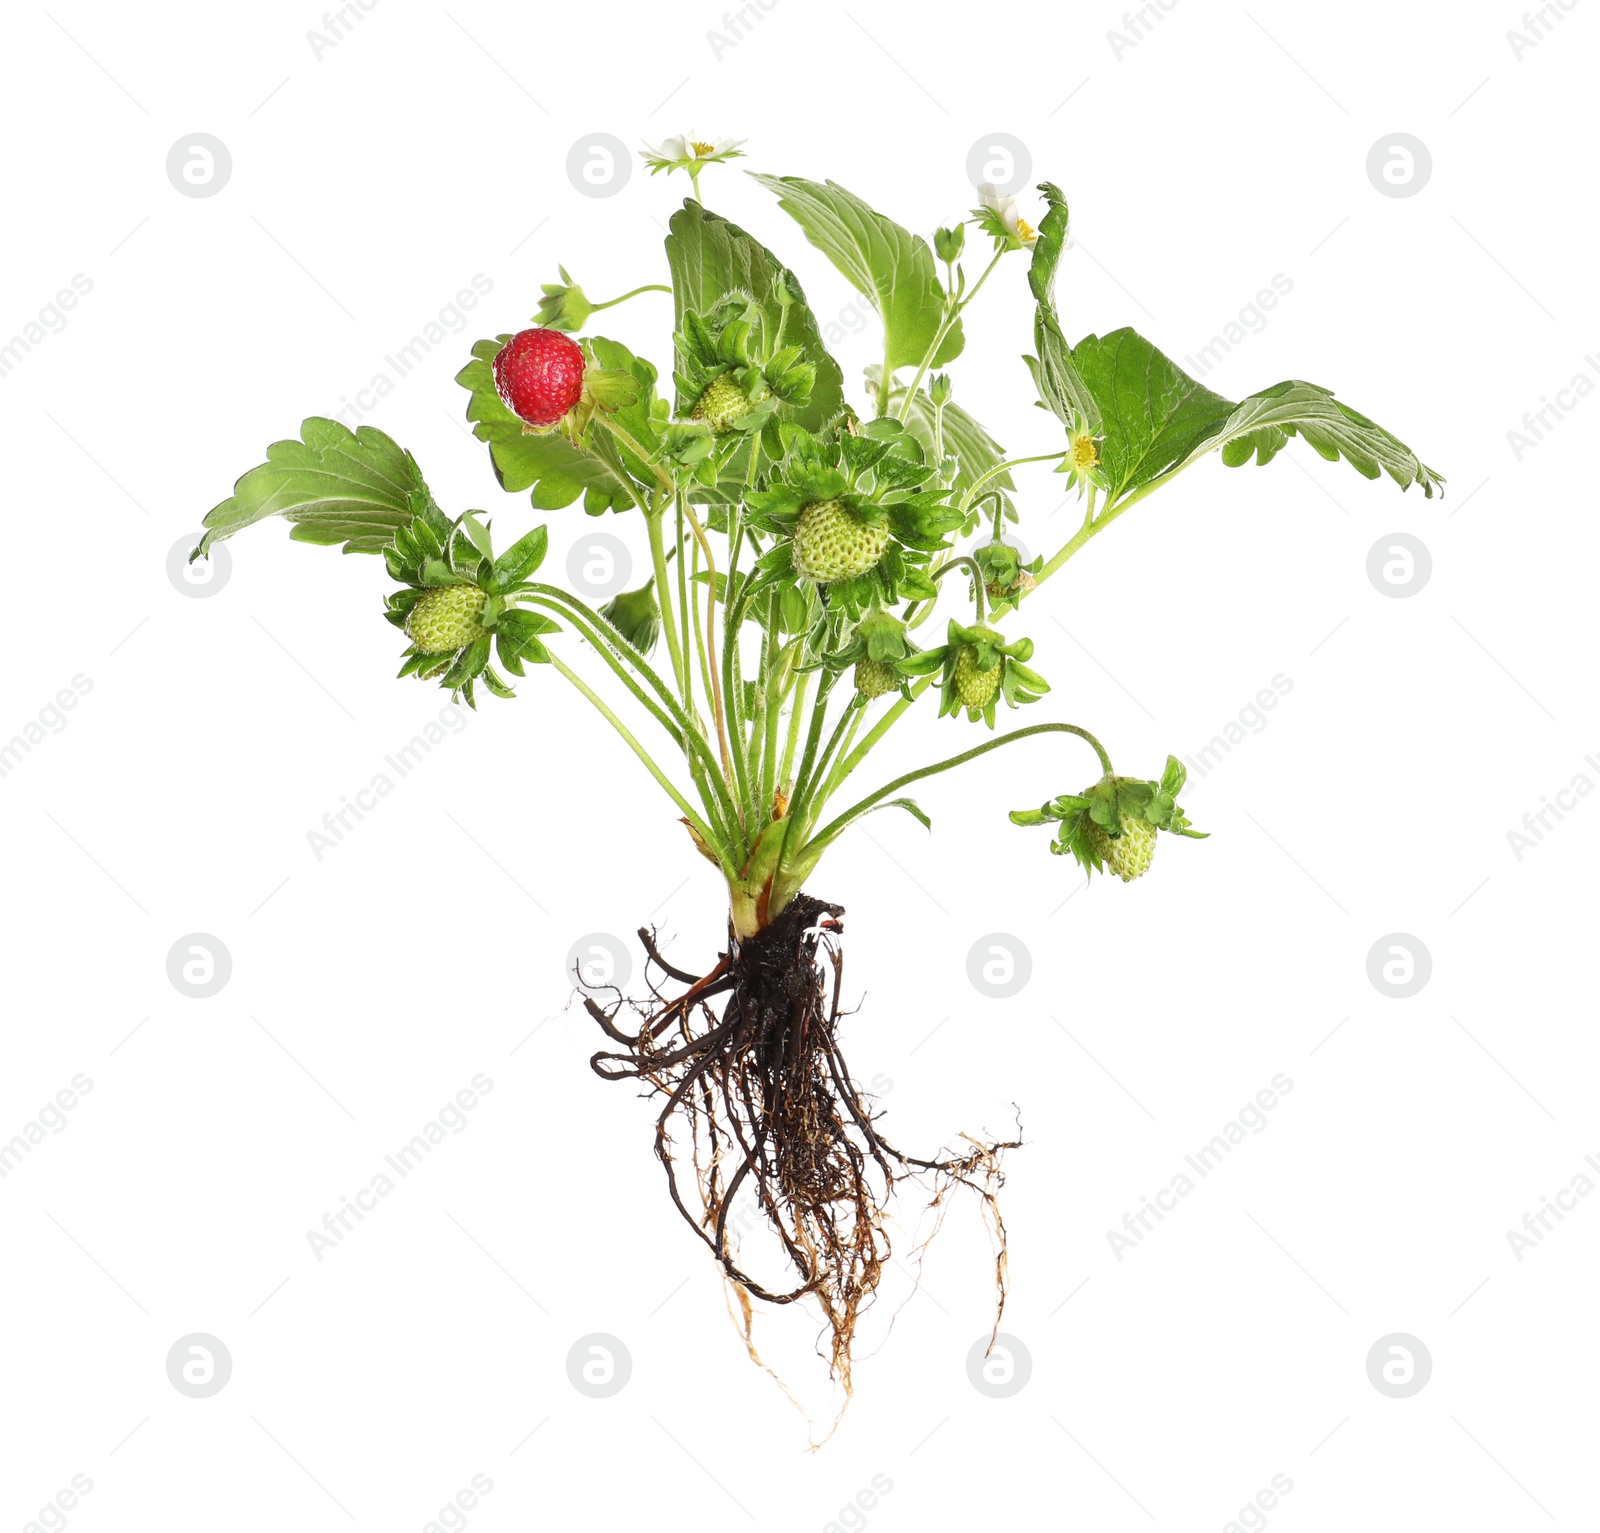 Photo of Strawberry seedling with leaves and fruits isolated on white